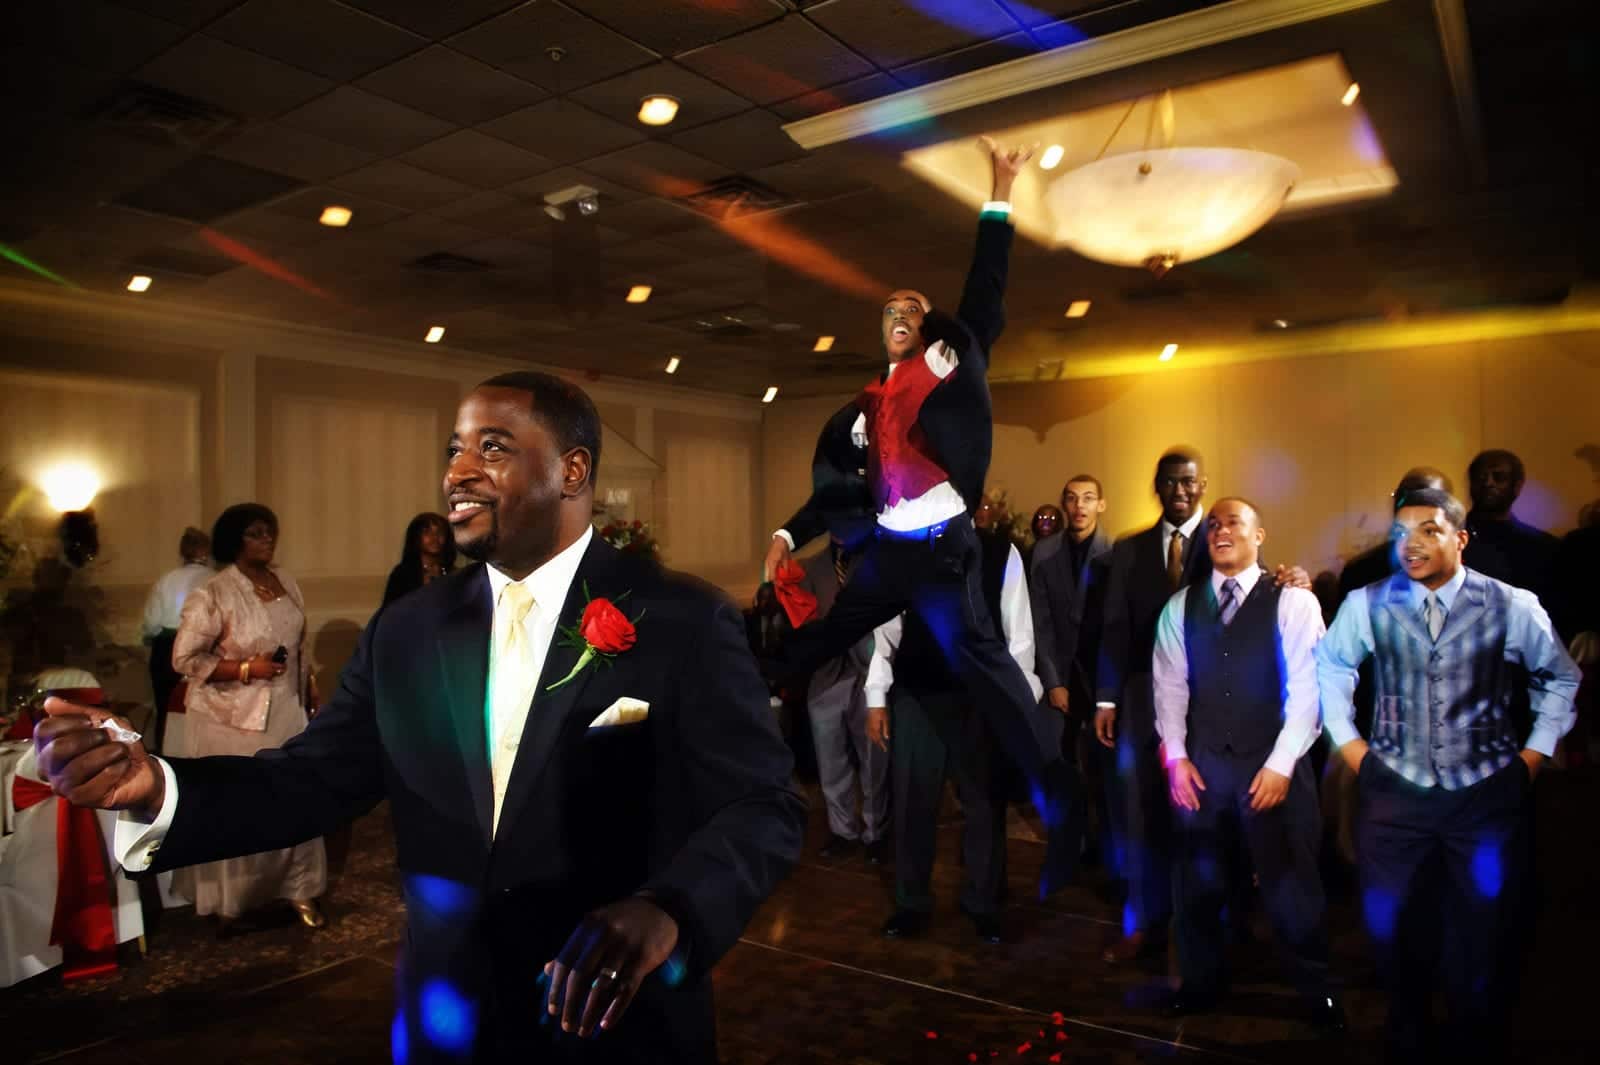 A groom smiles as he stands with his back to a group of men while preparing to throw a garter belt. There is a man jumping high into the air behind him.